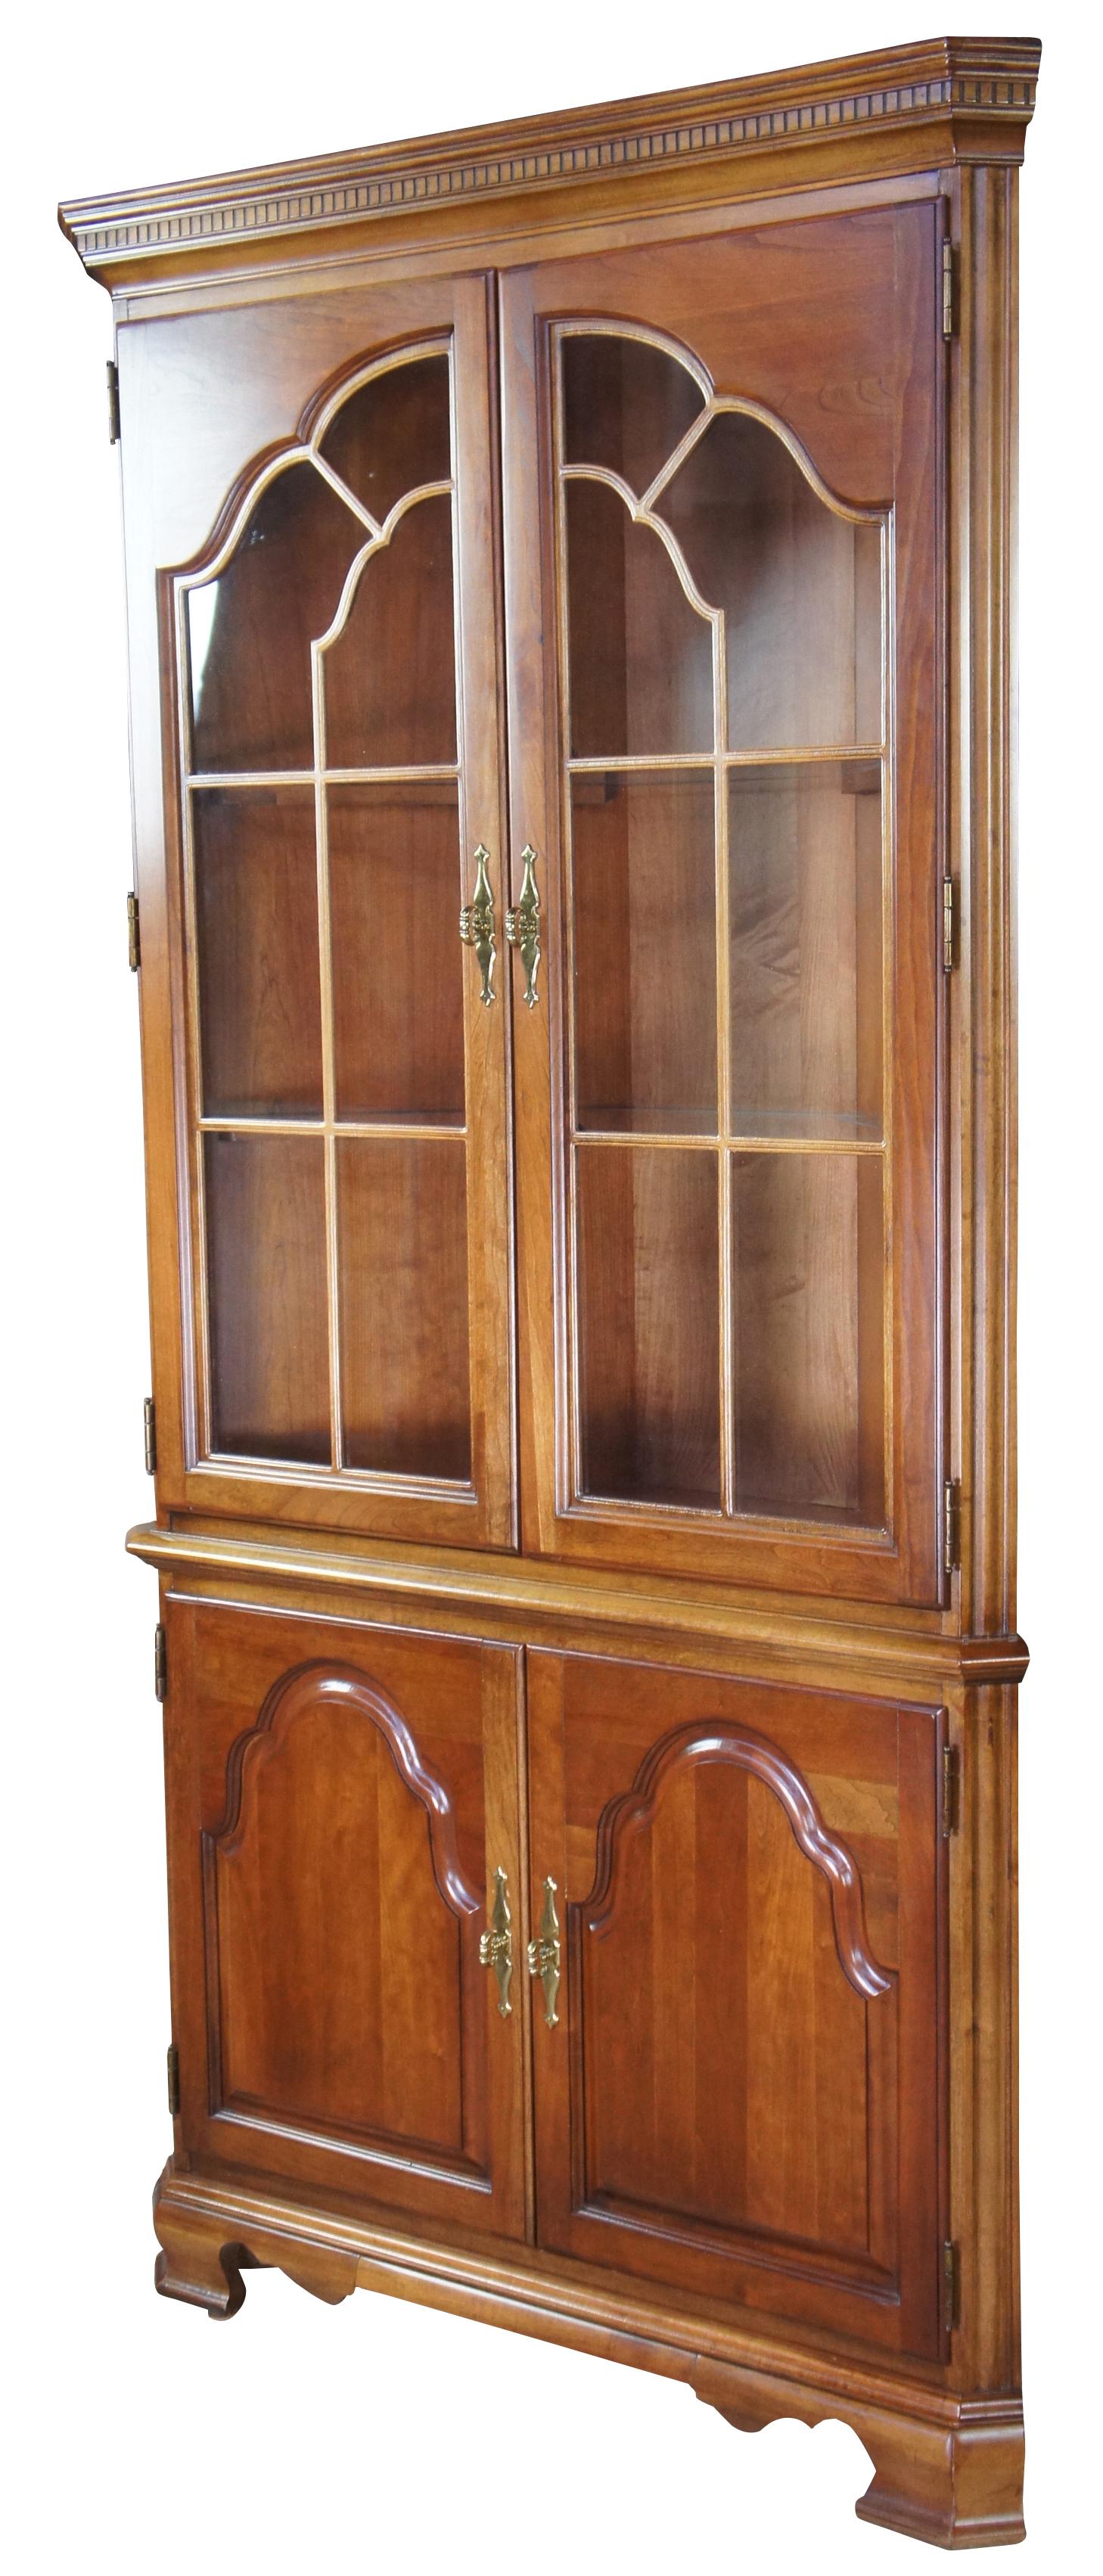 Stanley furniture Chippendale or Queen Anne style corner cabinet. Made of cherry with paneled glass doors, interior glass shelves illuminated from above, and lower cabinet.
 